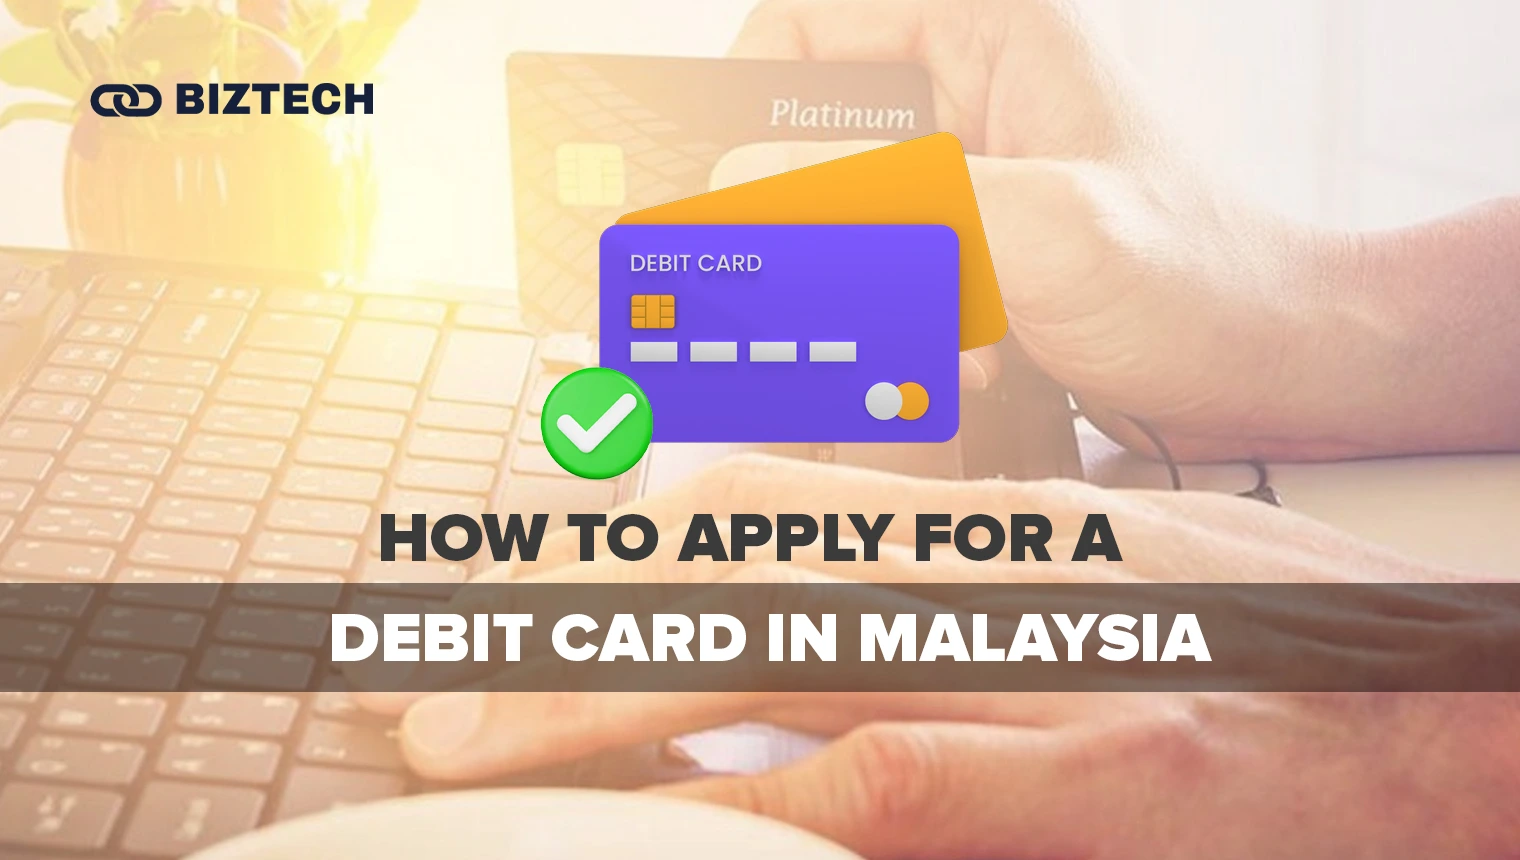 How to Apply for a Debit Card in Malaysia